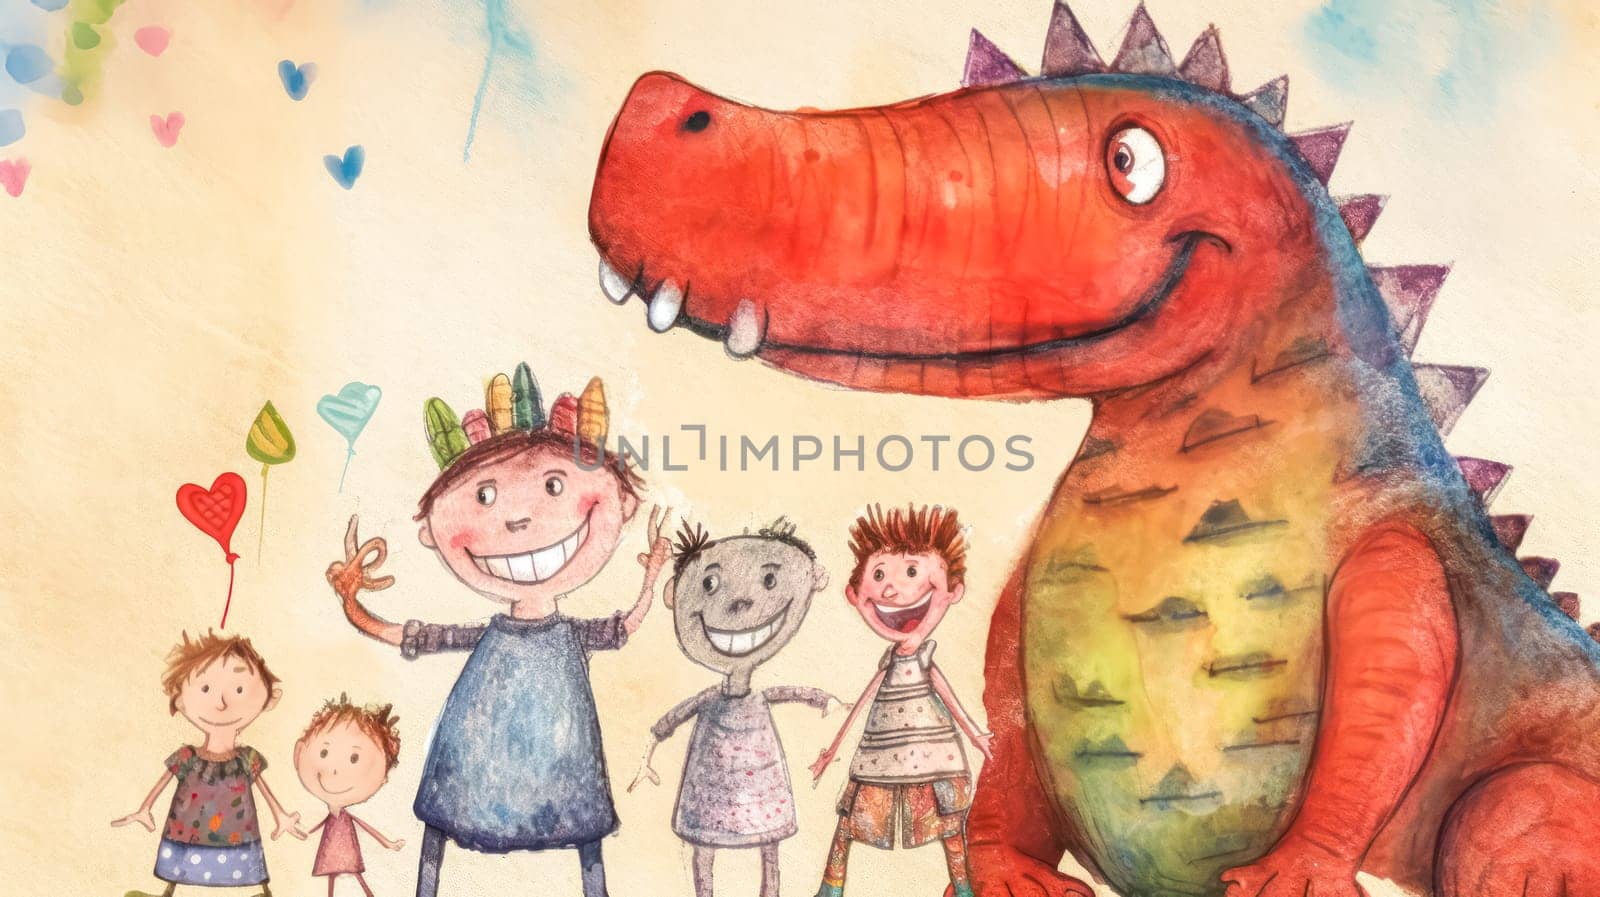 childrens pencil drawing depicts playful dinosaurs and kids having a blast together by Alla_Morozova93